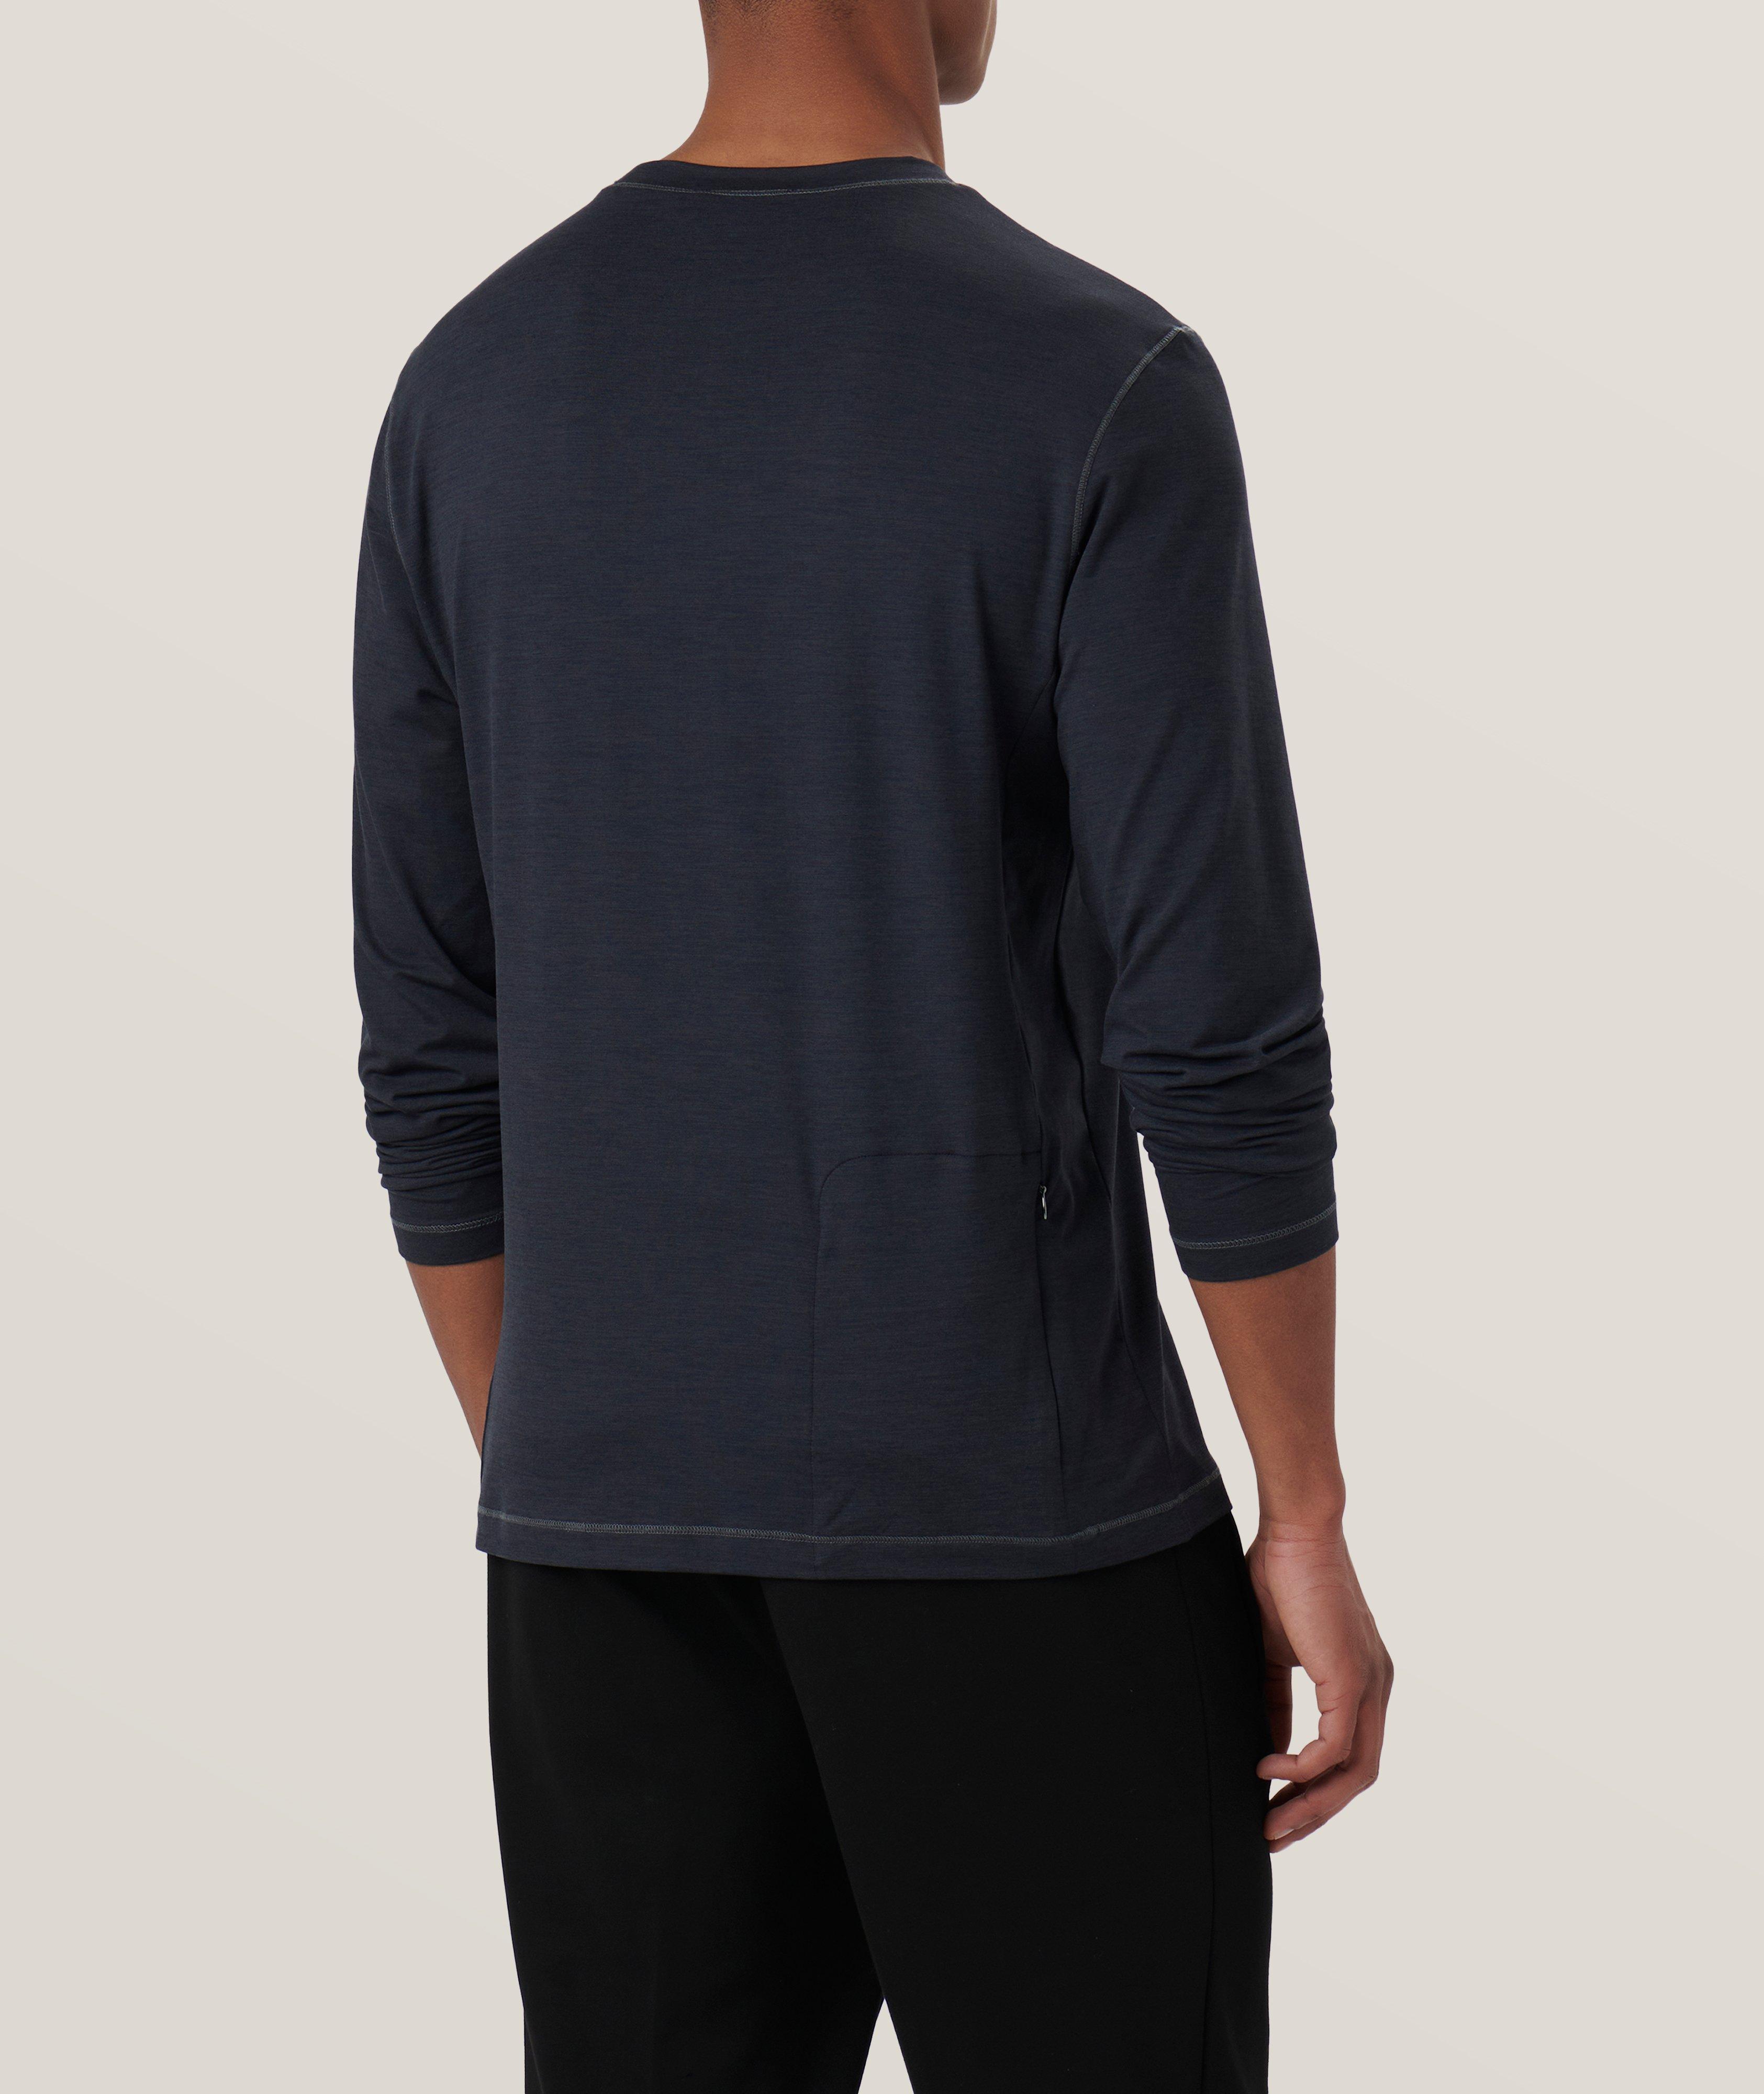 4-Way Stretch UV50 Performance Pullover image 3